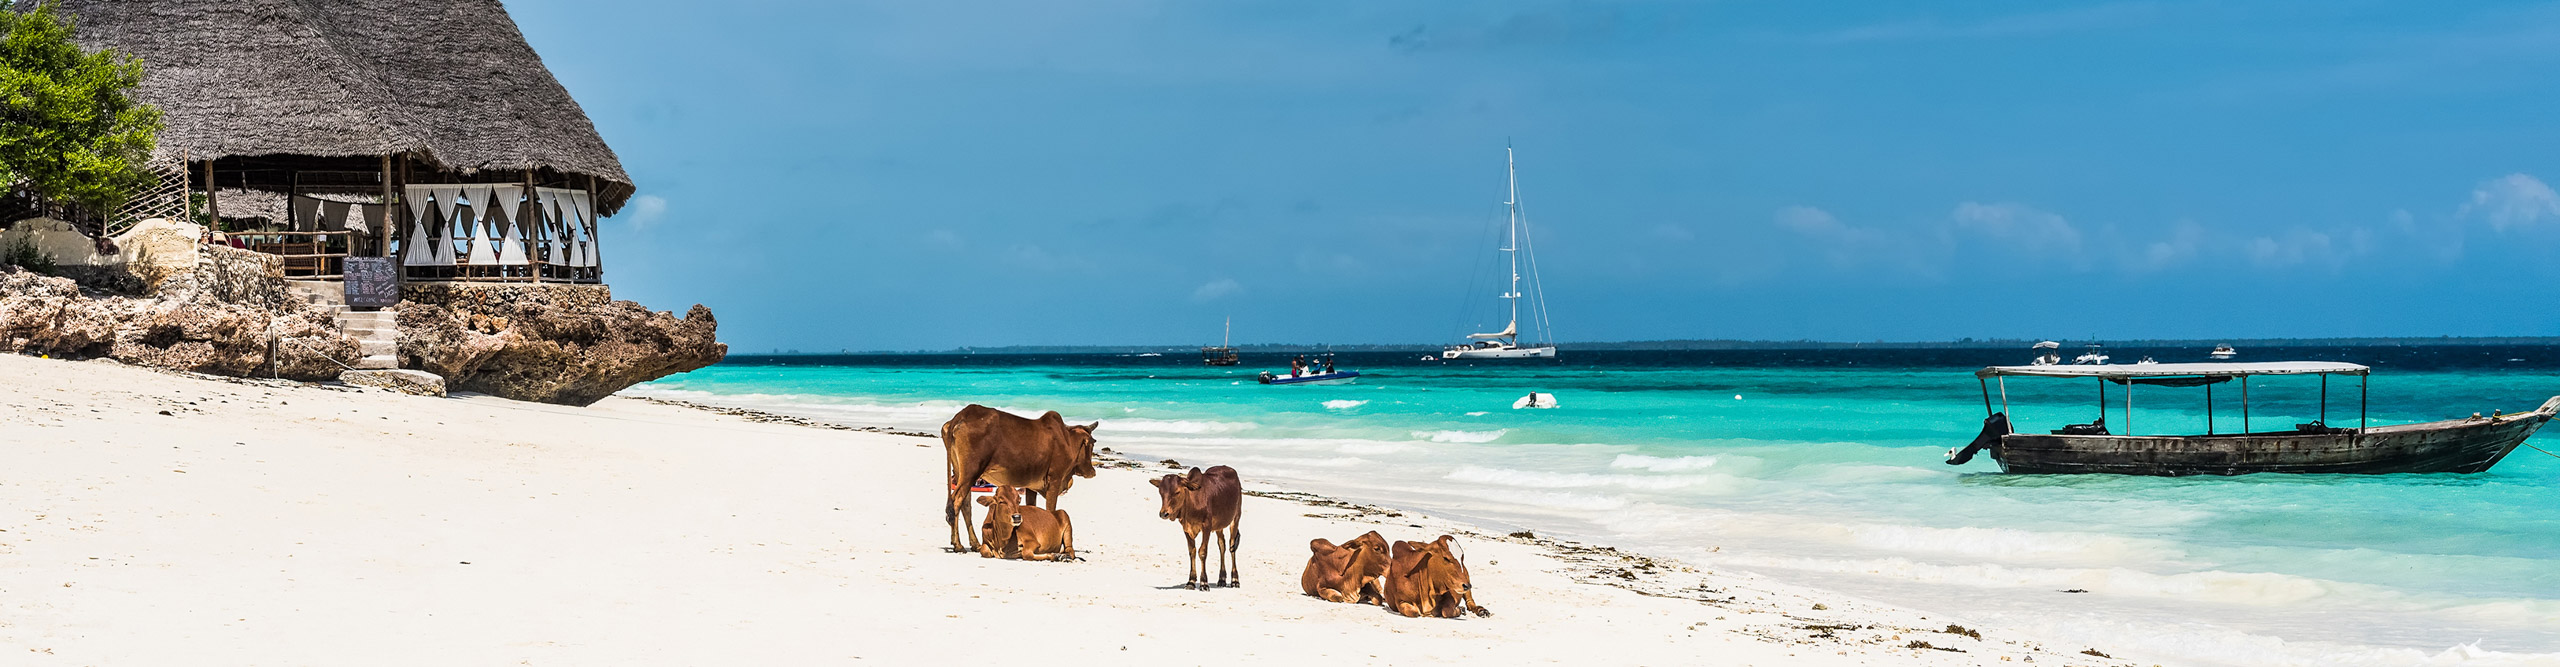 picturesque view with cows and house on the beach and a boat in water with blue sky, Zanzibar